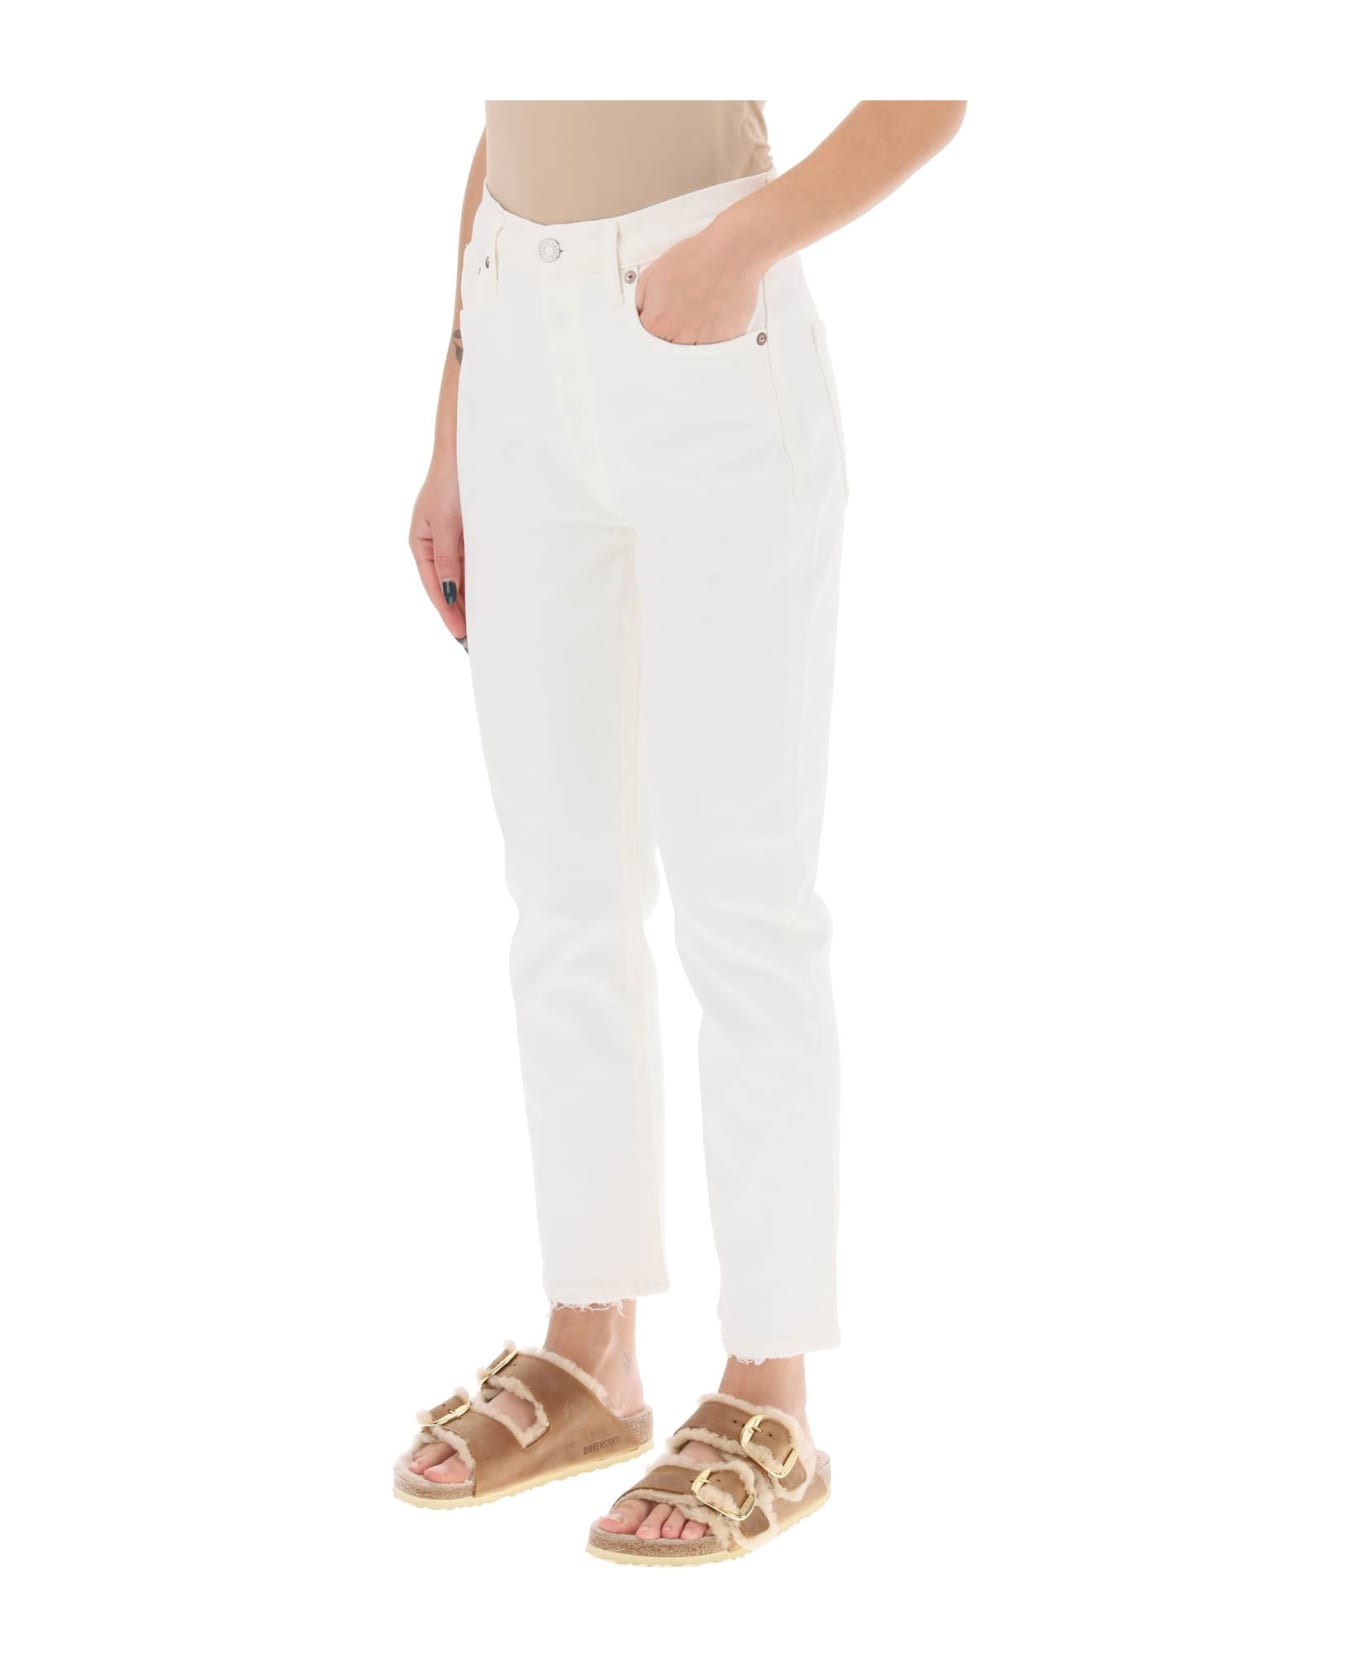 AGOLDE Riley High-waisted Cropped Jeans - SOUR CREAM (White)